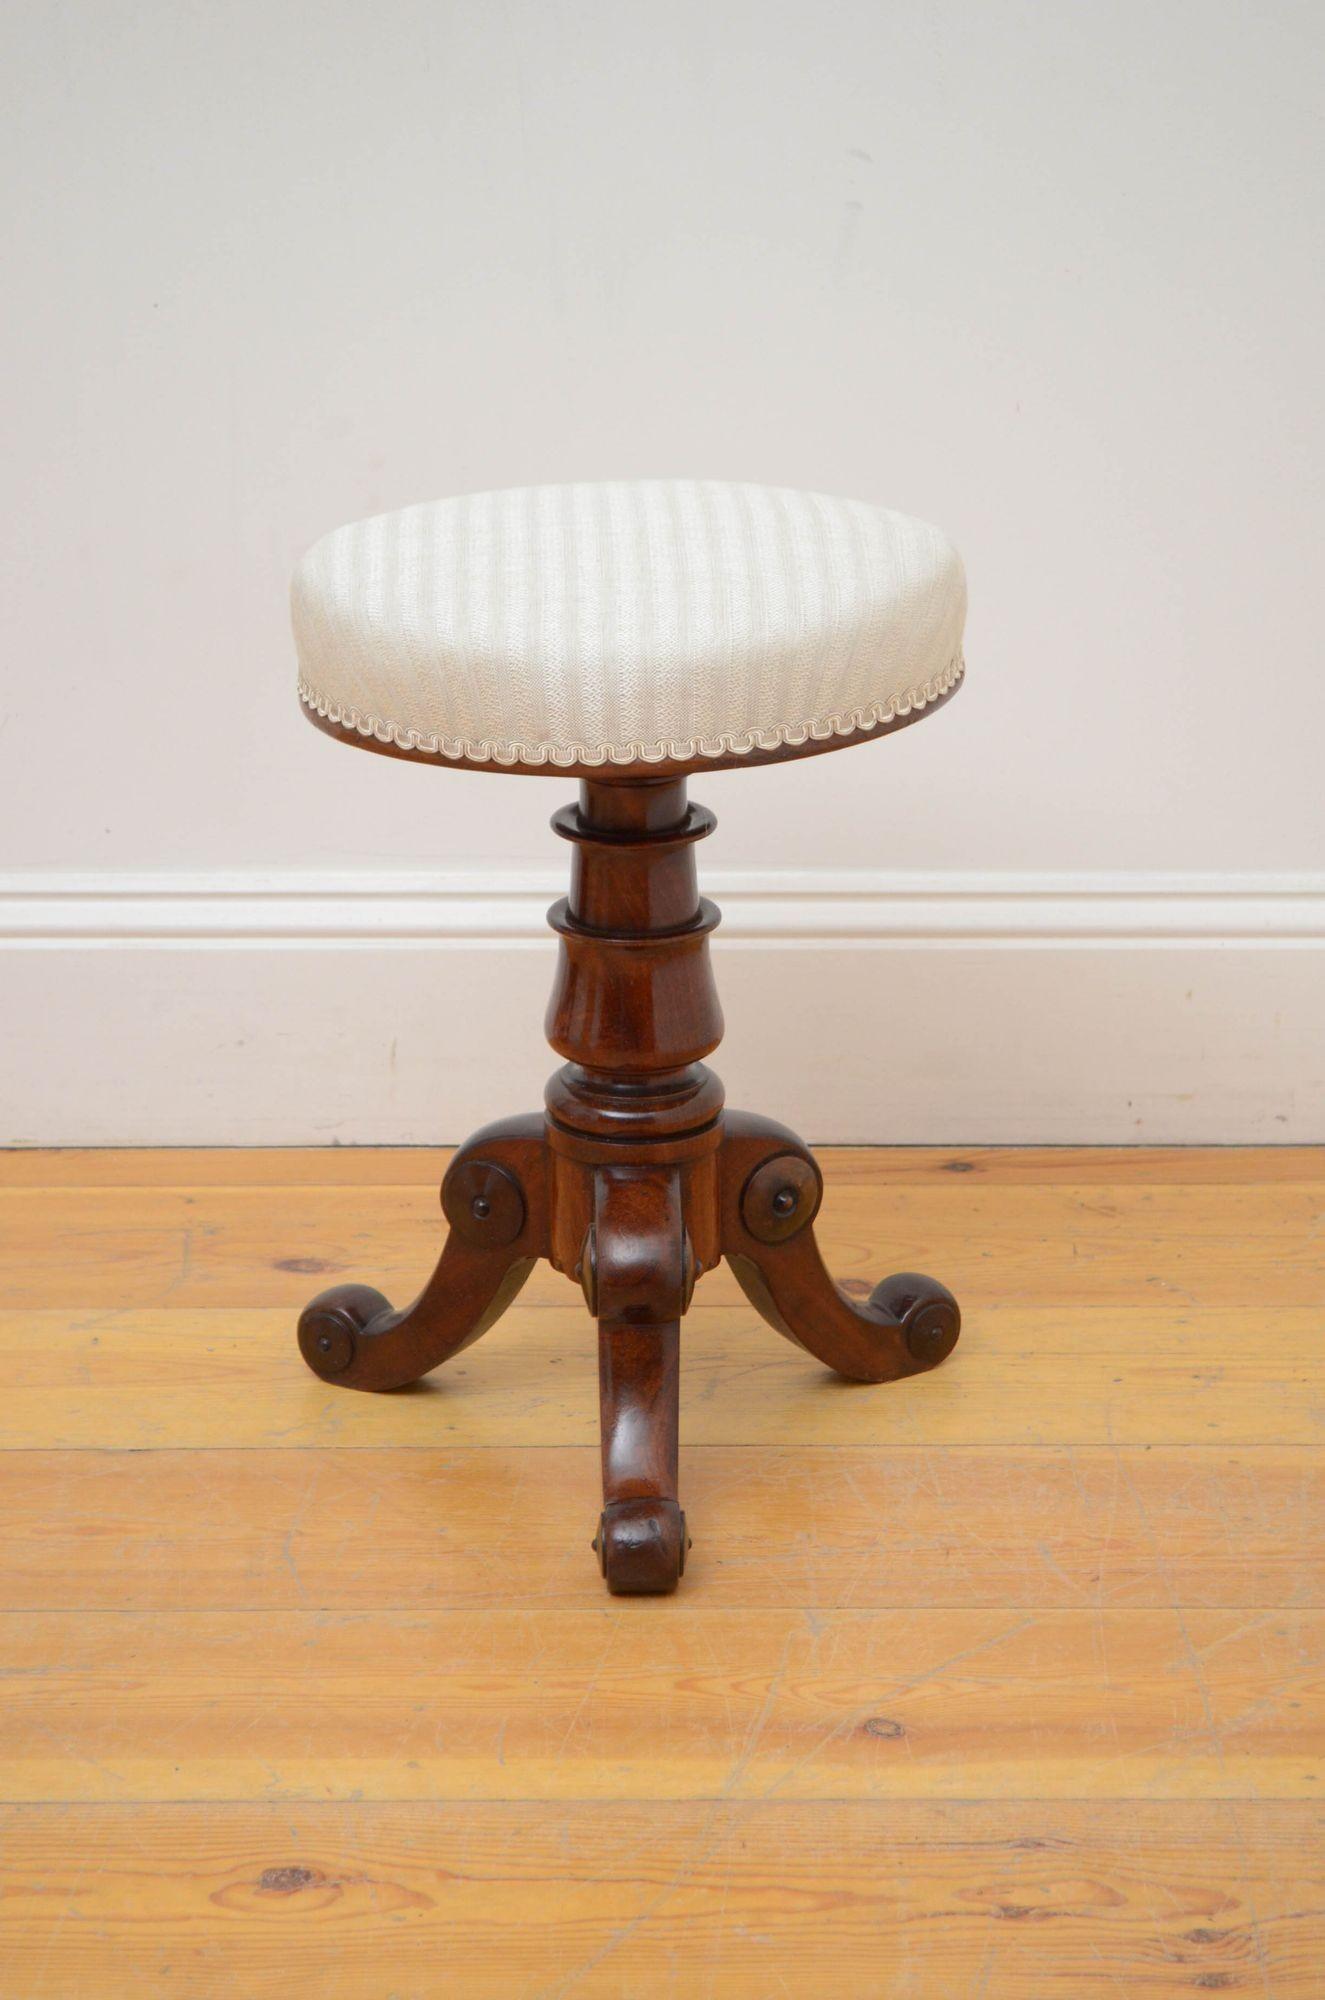 Sn5424 Elegant William IV mahogany piano stool or dressing table stool, having height adjustable revolving seat, newly recovered in stripy cream fabric, standing on vase shaped column terminating in three cabriole legs decorated with turned paterae.